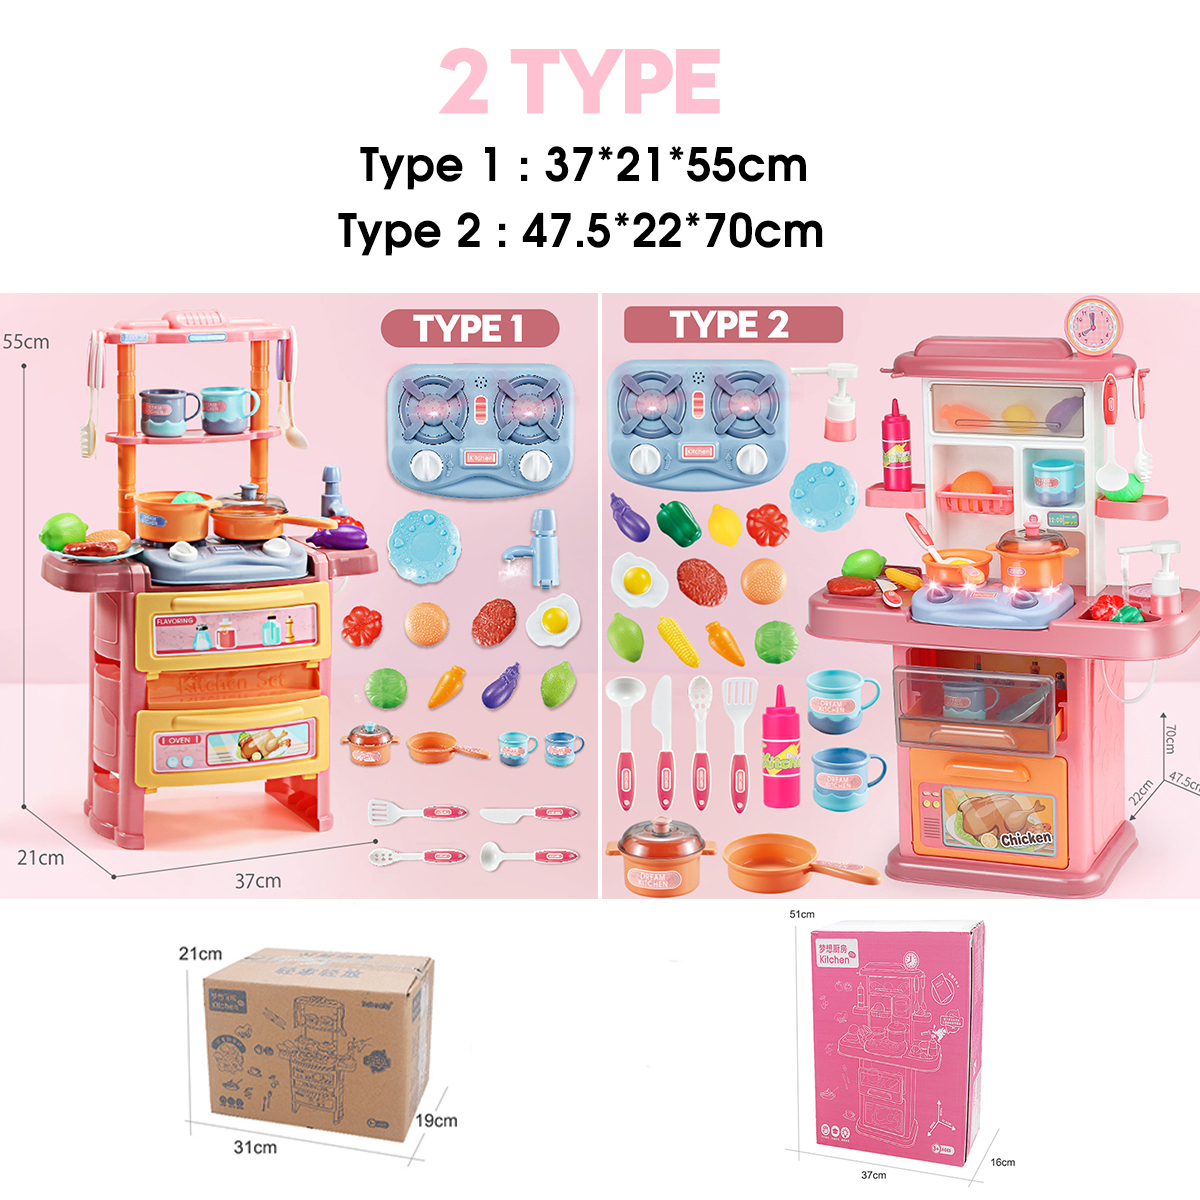 Dream-Kitchen-Role-Play-Cooking-Children-Tableware-Toys-Set-with-Sound-Light-Water-Outlet-Funtion-1678214-10